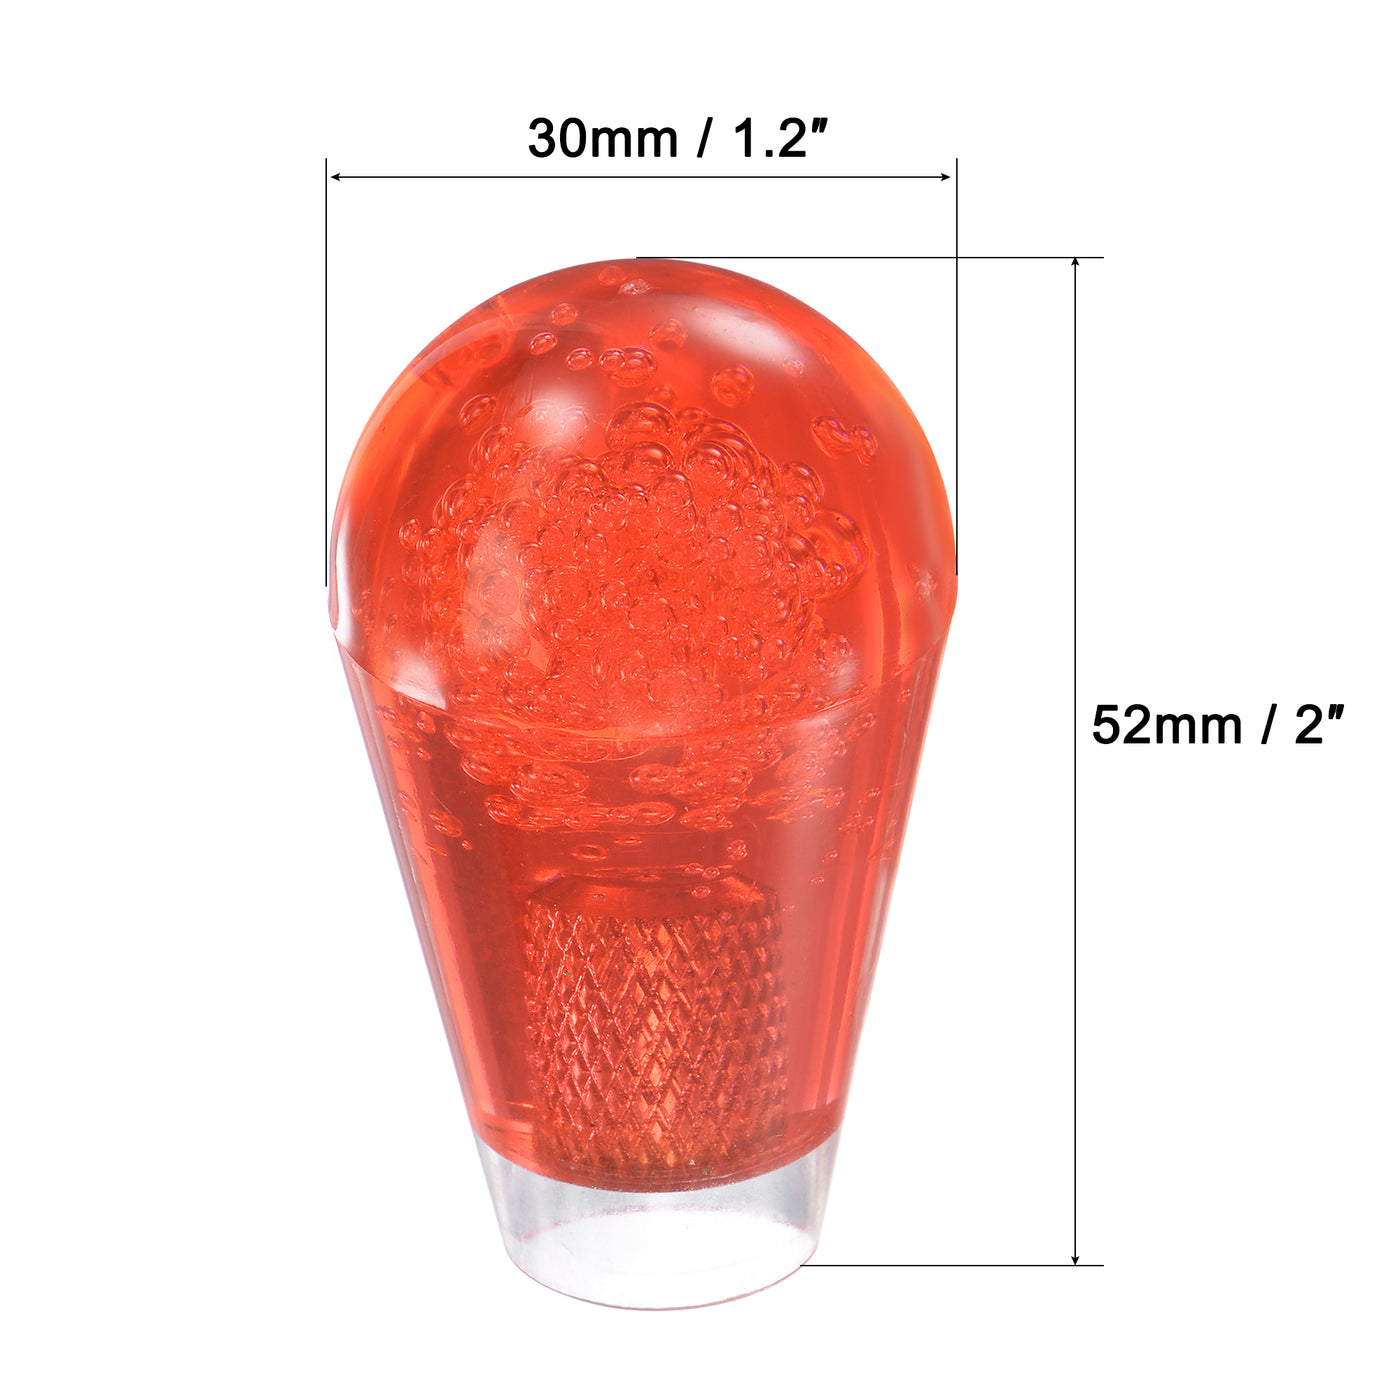 uxcell Uxcell Ellipse Oval Joystick Head Rocker Ball Top Handle Arcade Game Replacement Red 2pcs